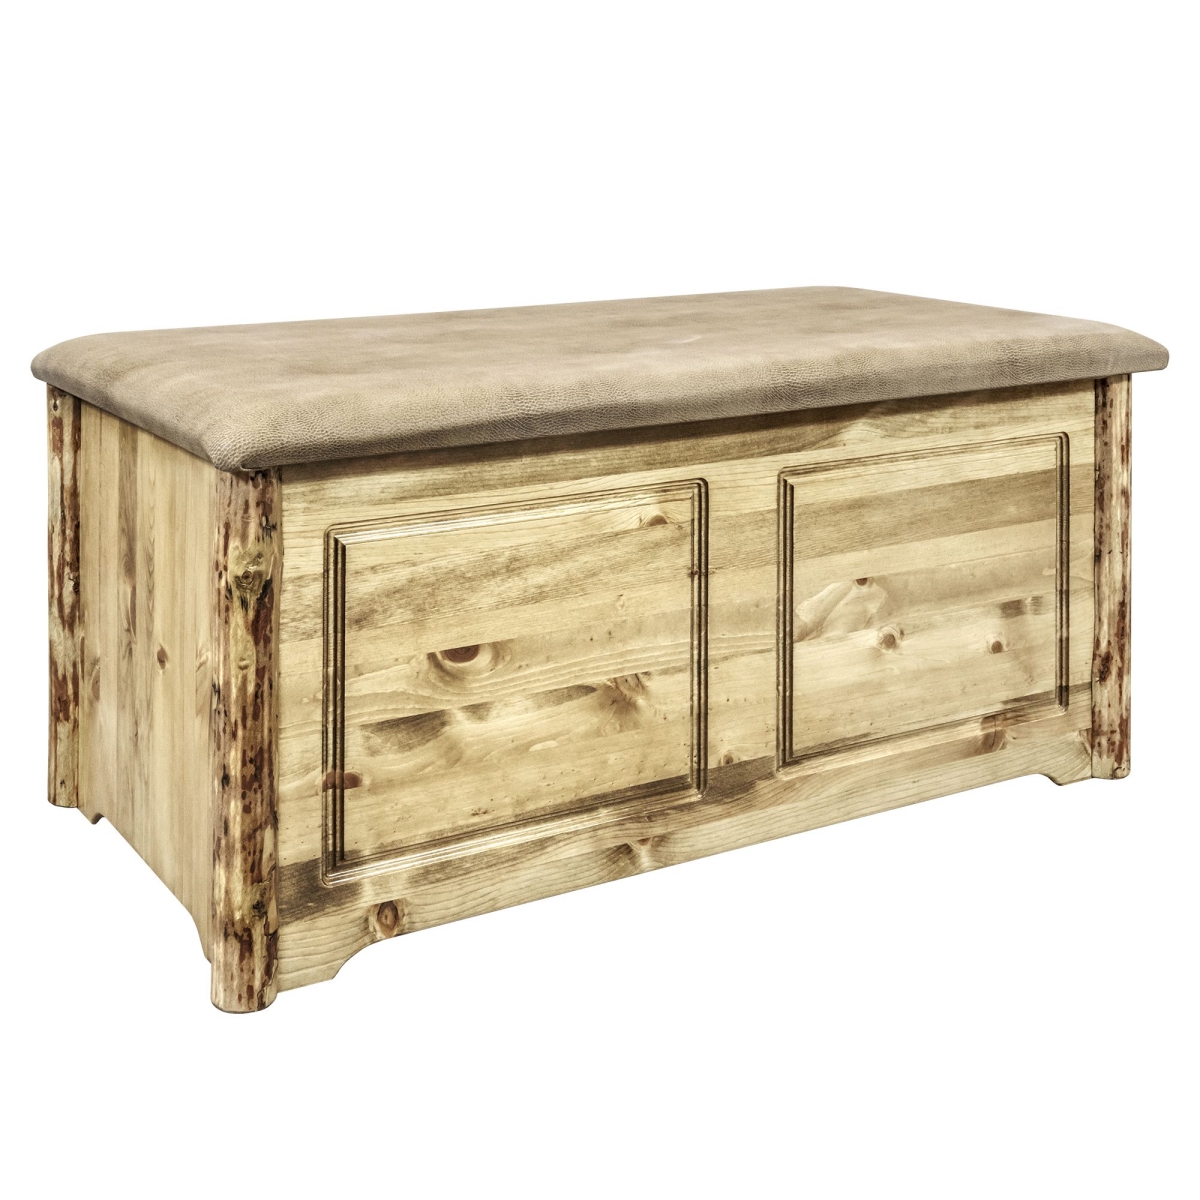 Picture of Montana Woodworks MWGCSBCSBUCK Glacier Country Small Blanket Chest, Buckskin Upholstery